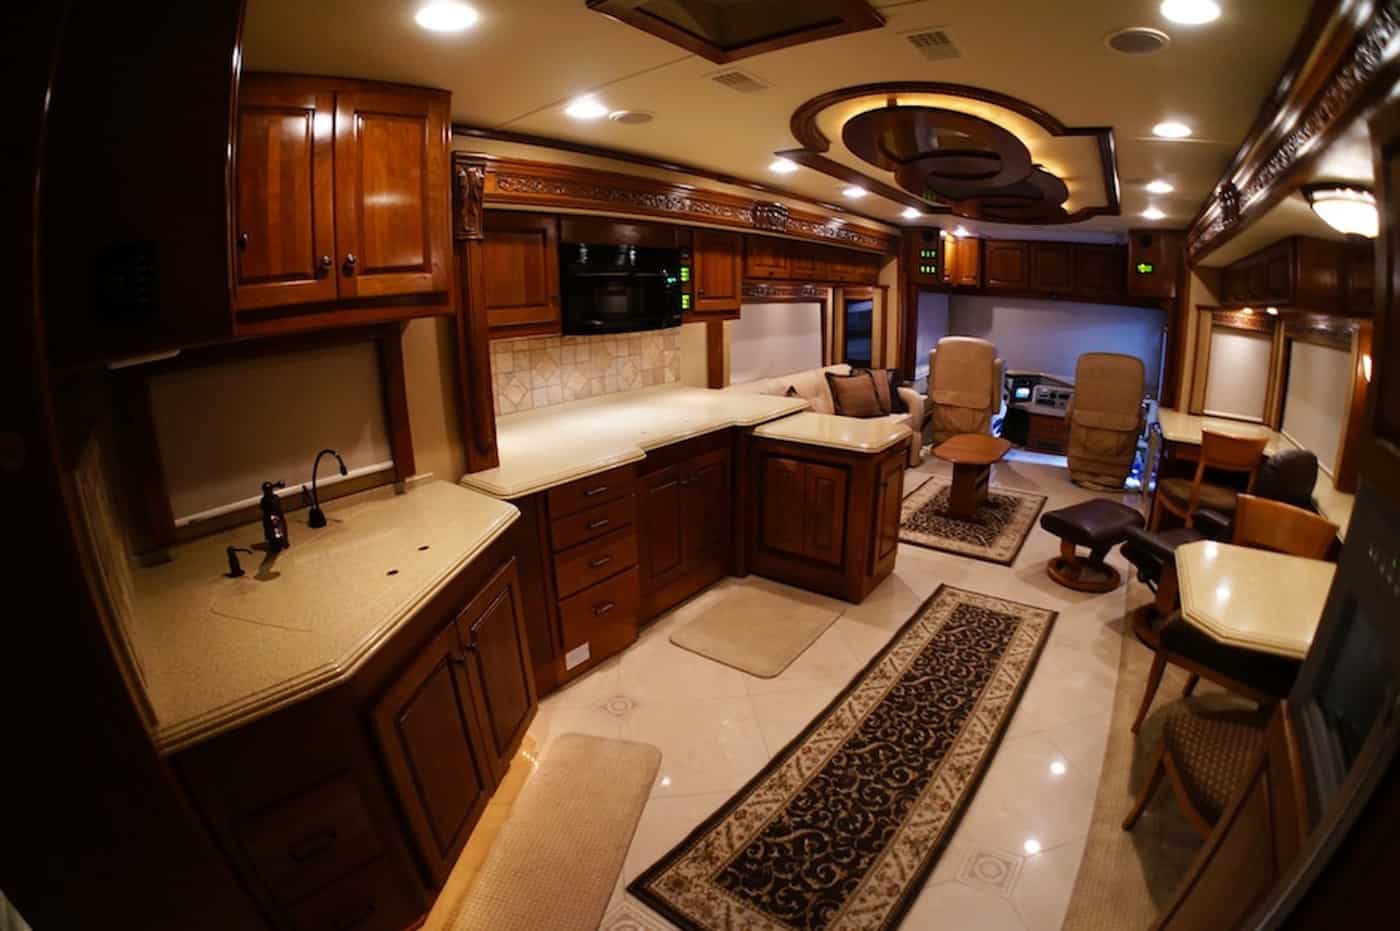 RV Kitchen Remodel And Repair Near Me